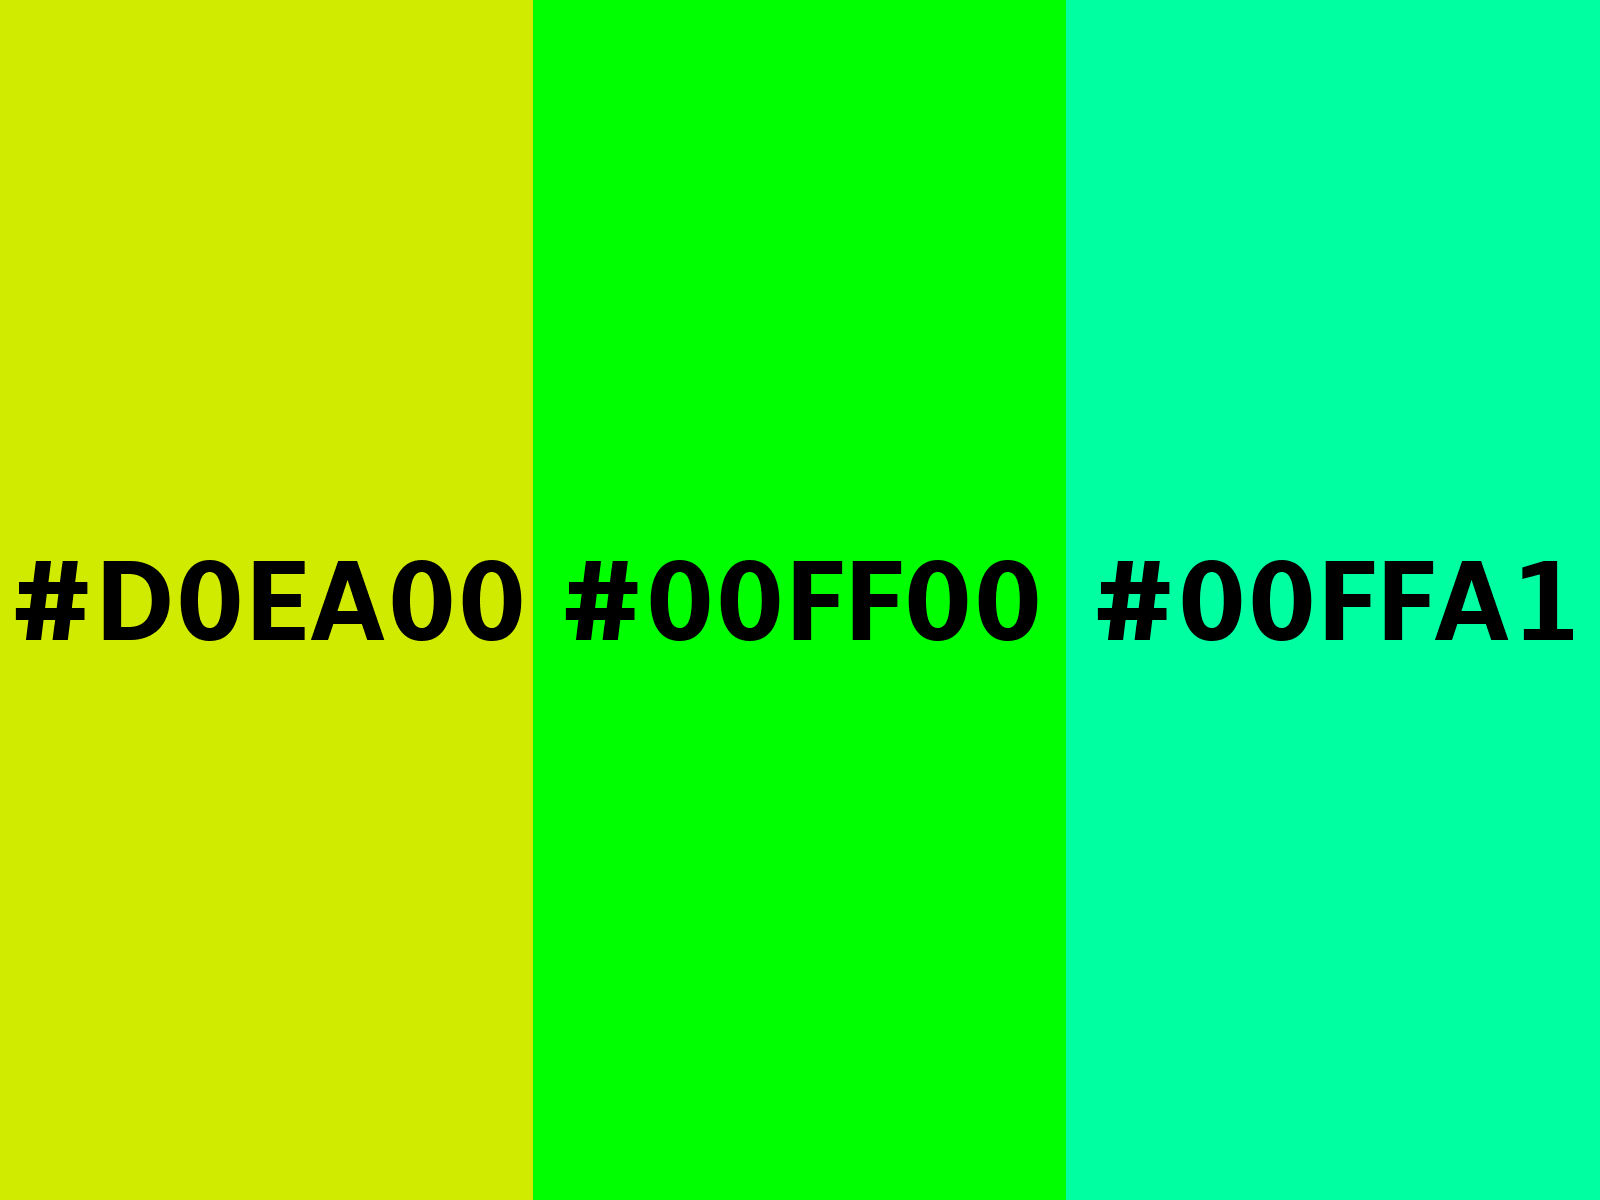 What color is #00ff00 text?